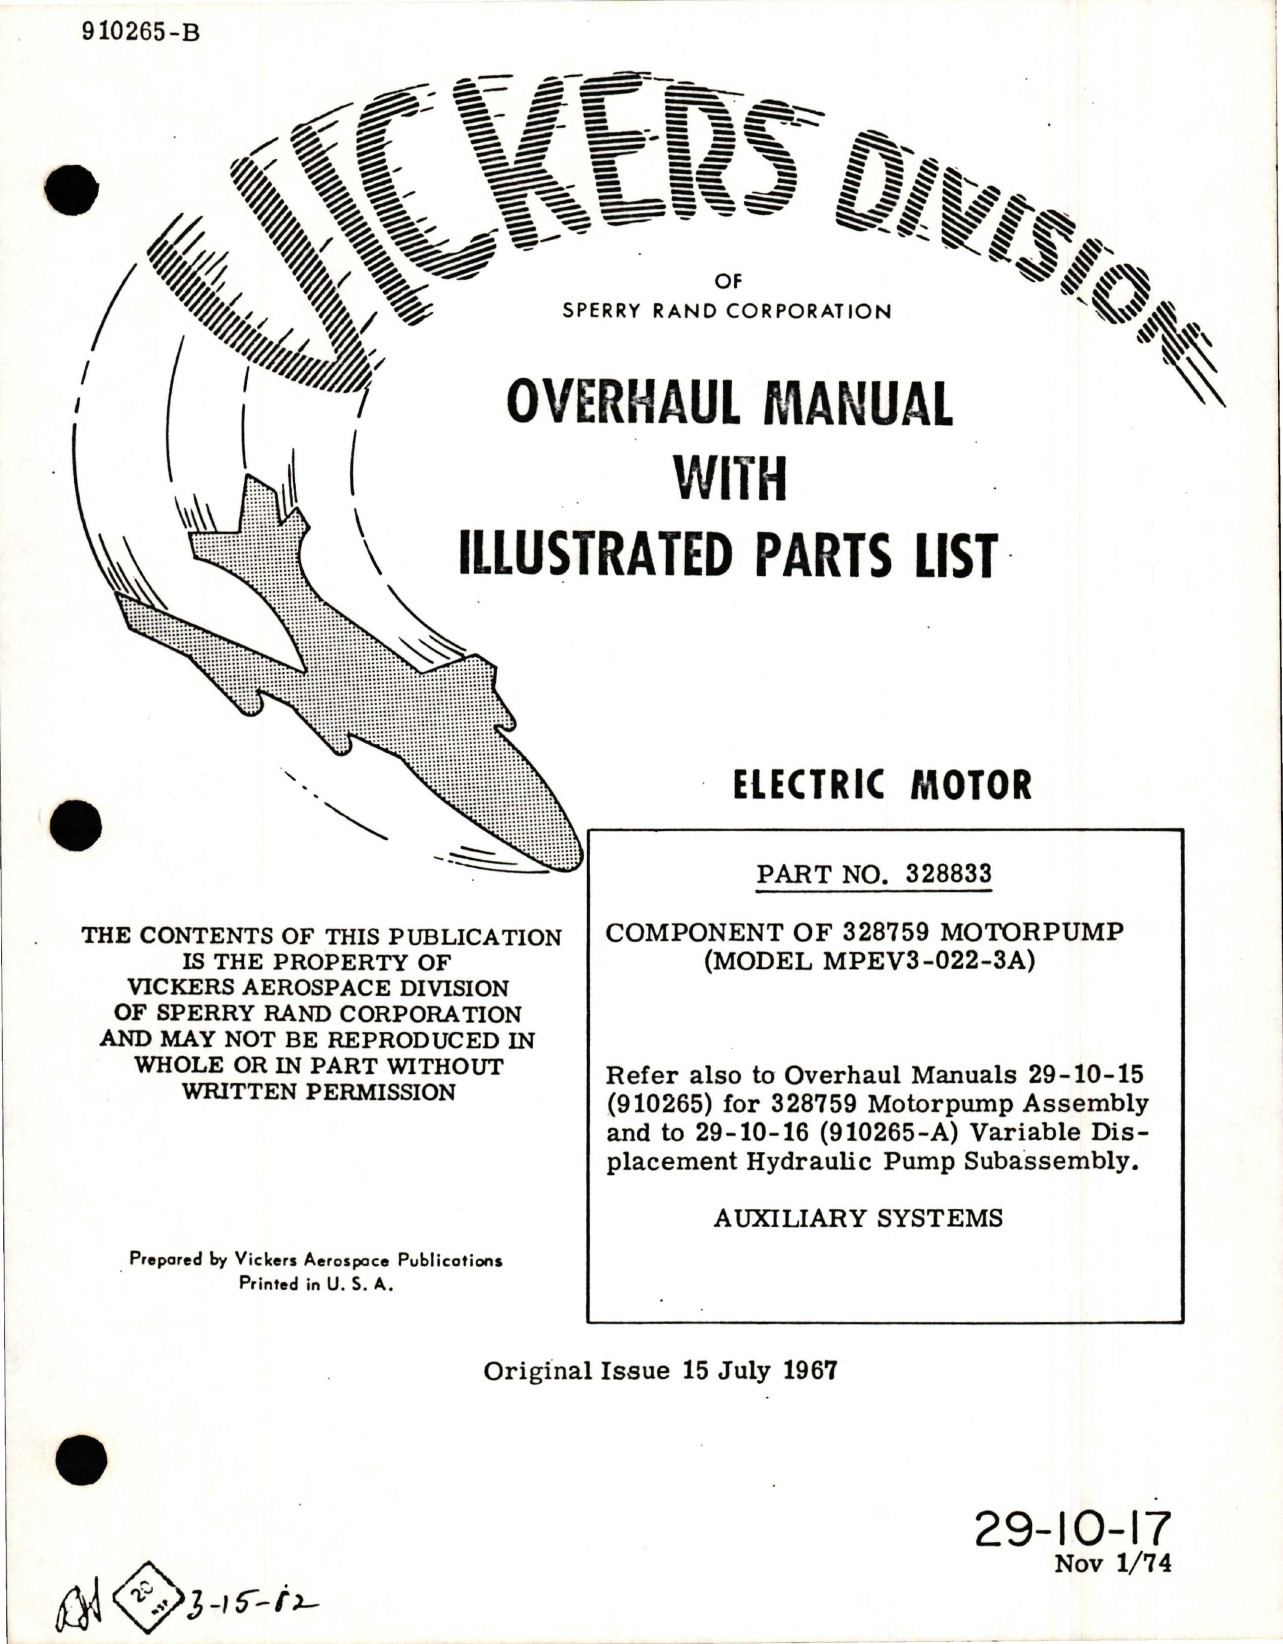 Sample page 1 from AirCorps Library document: Overhaul with Illustrated Parts List for Electric Motor - Part 328833